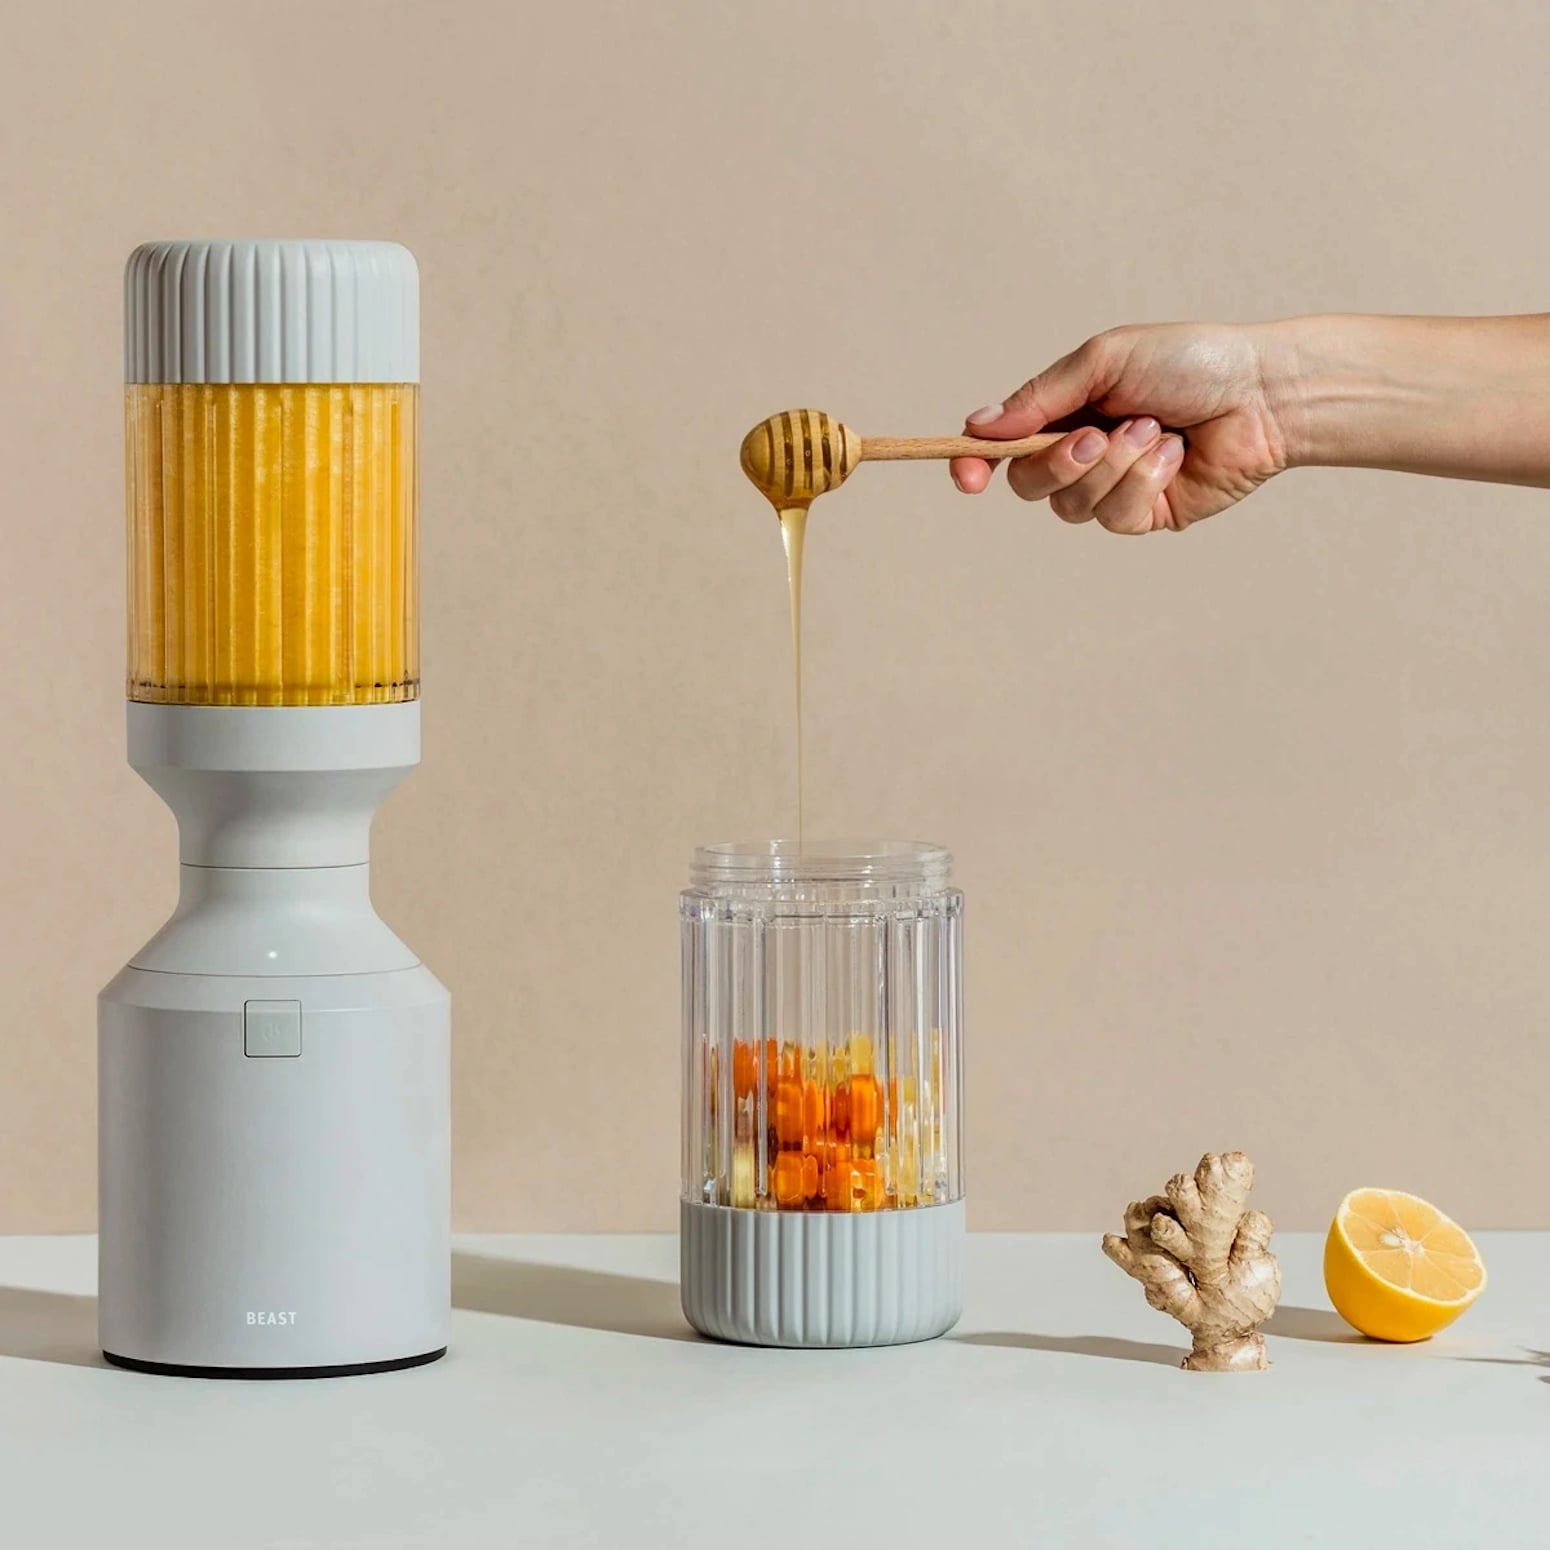 10 Smart Kitchen Gadgets Every Homeowner Needs to Have